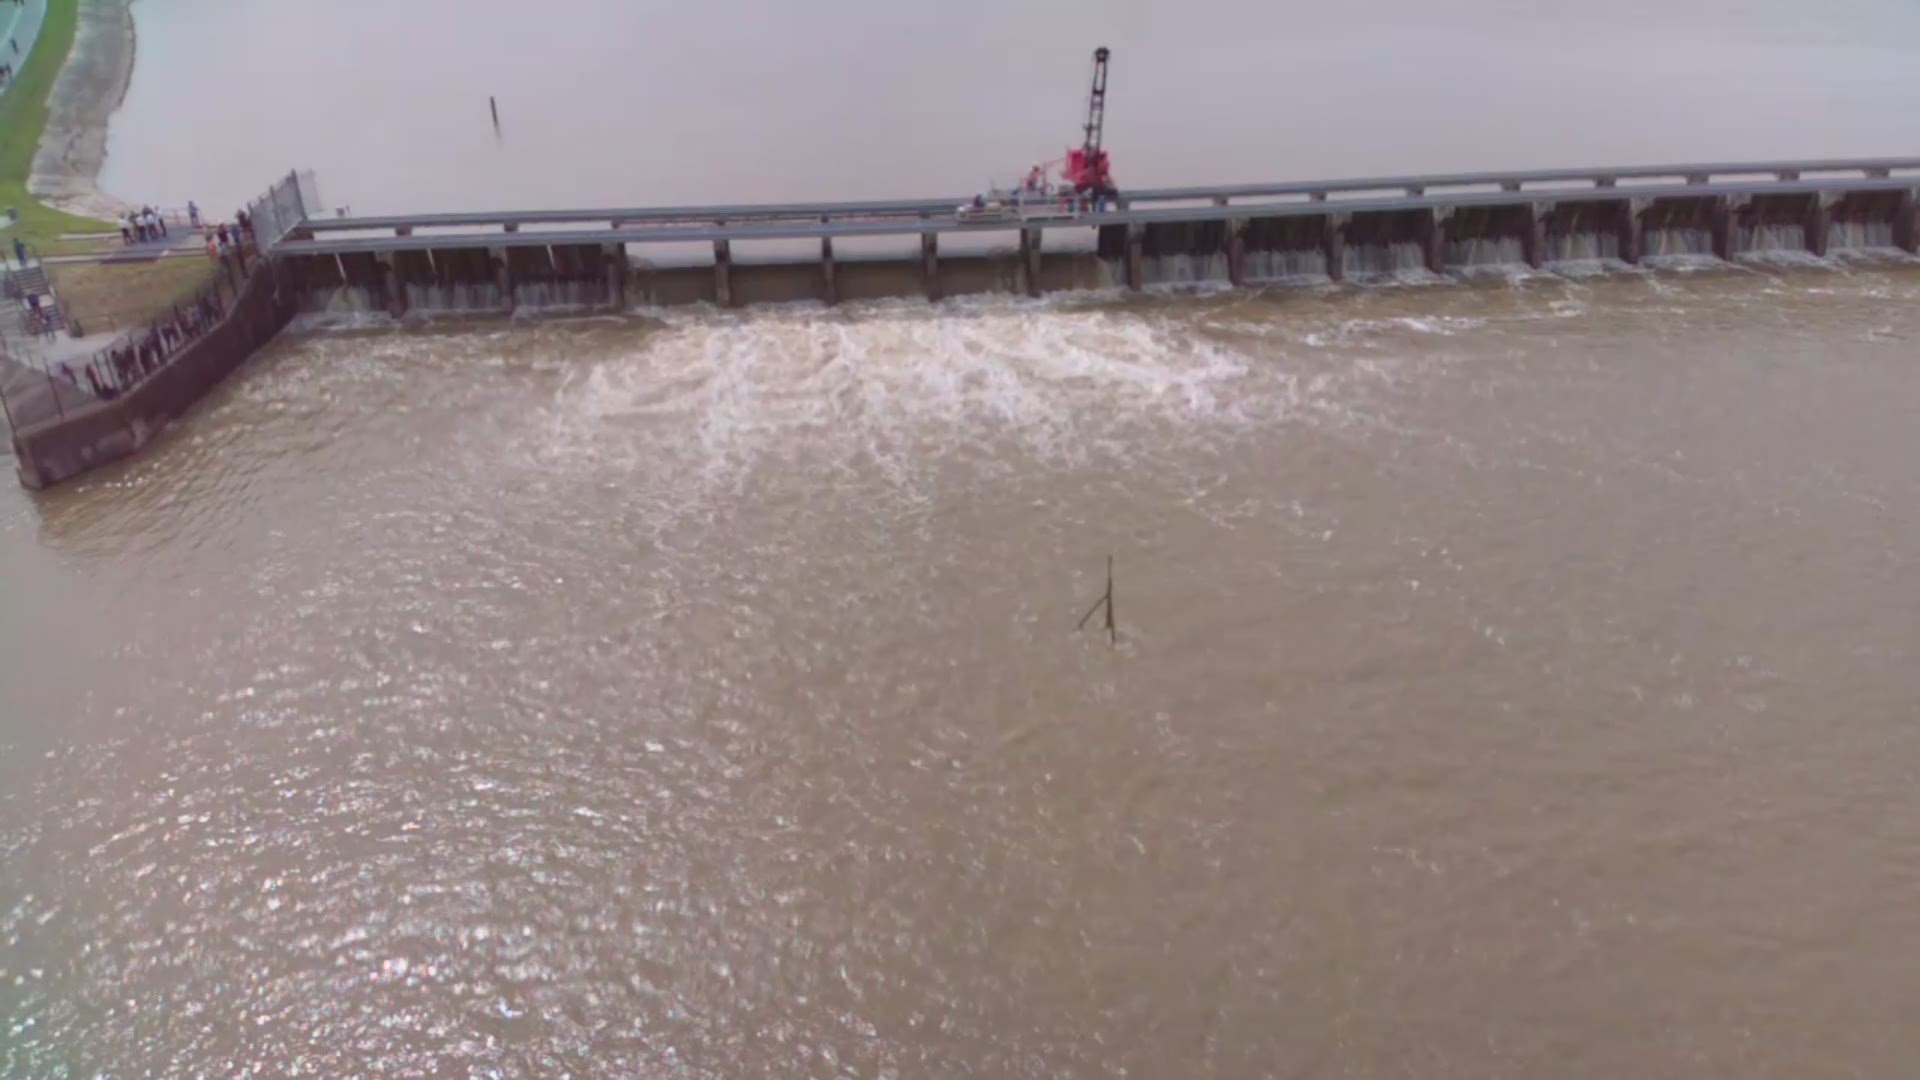 The Army Corps of Engineers supplied some aerial video of the spillway opening.